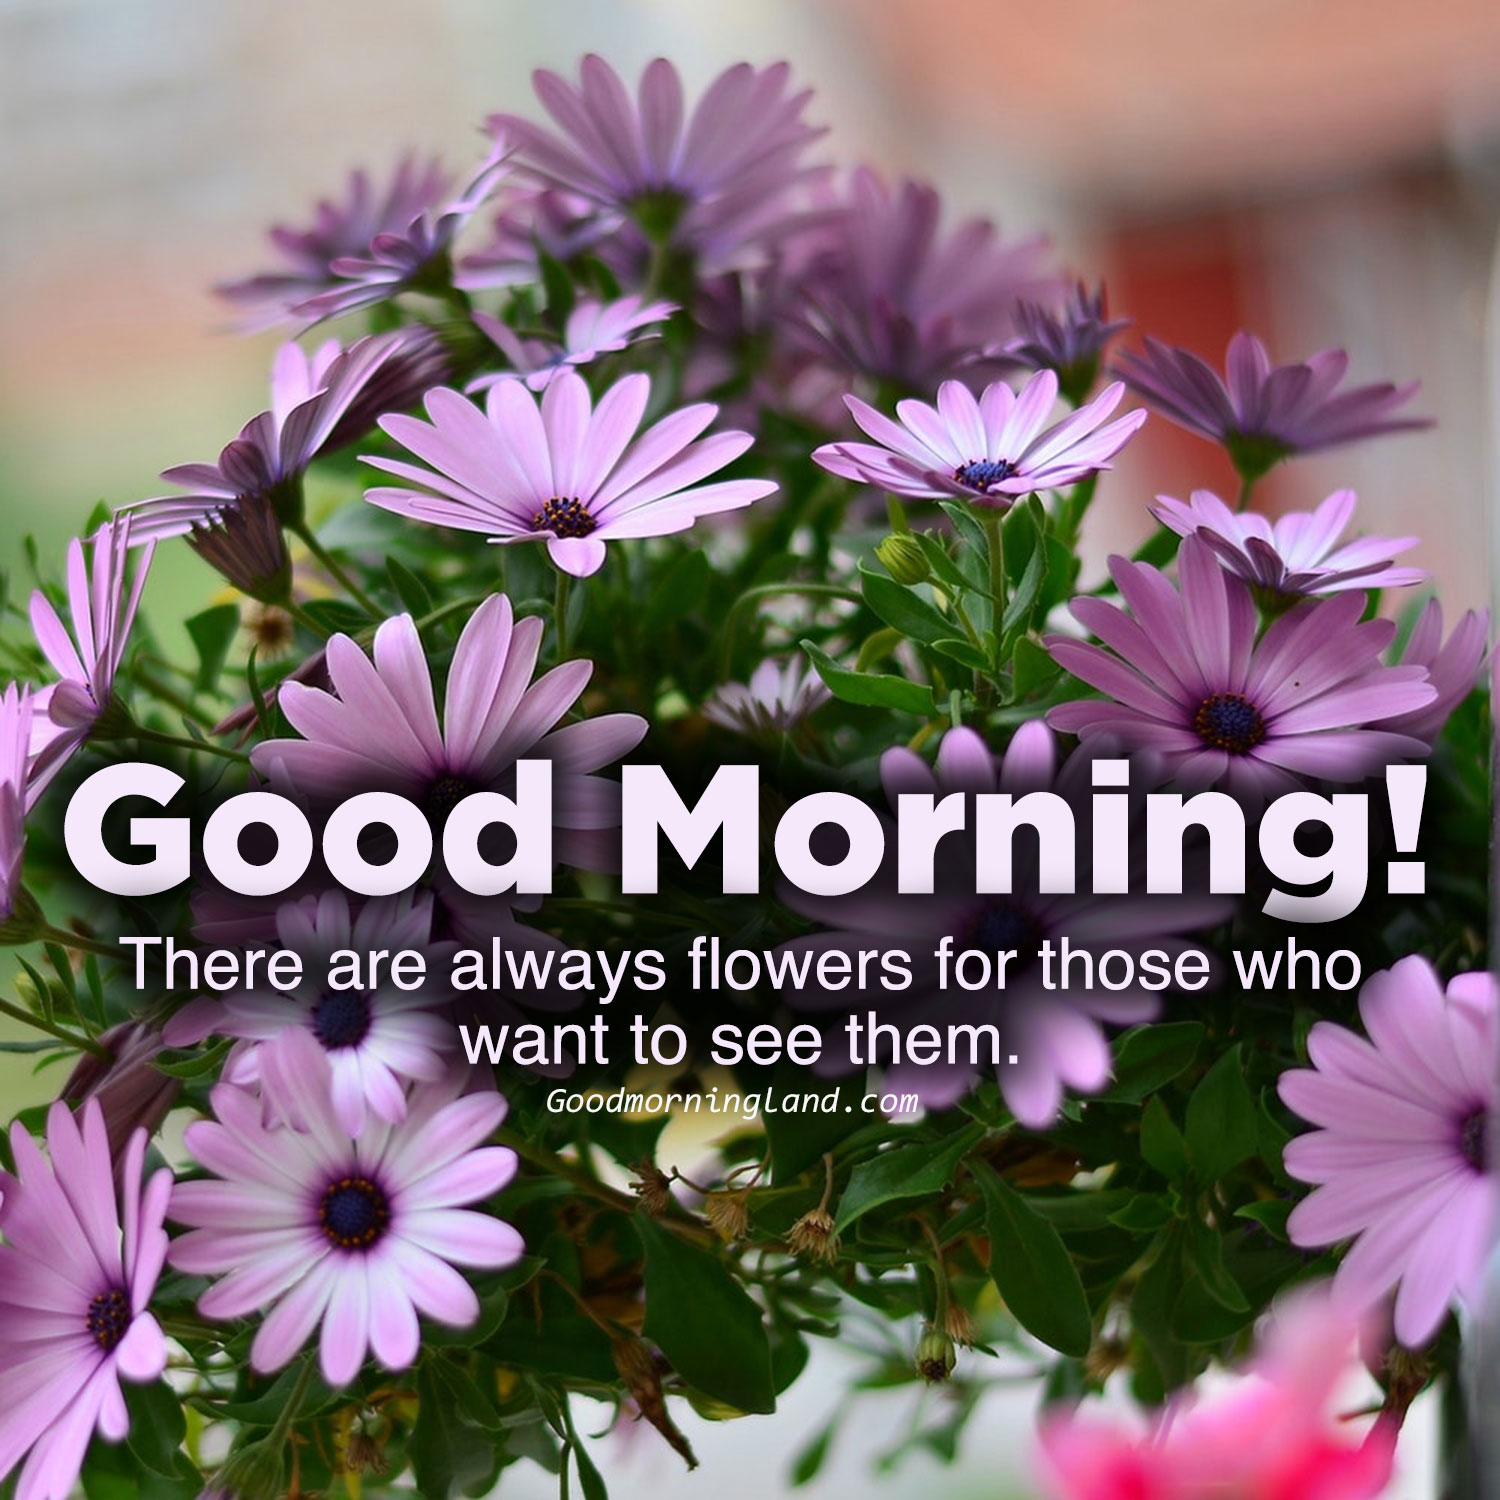 Download image of Good morning flowers with images Good Morning